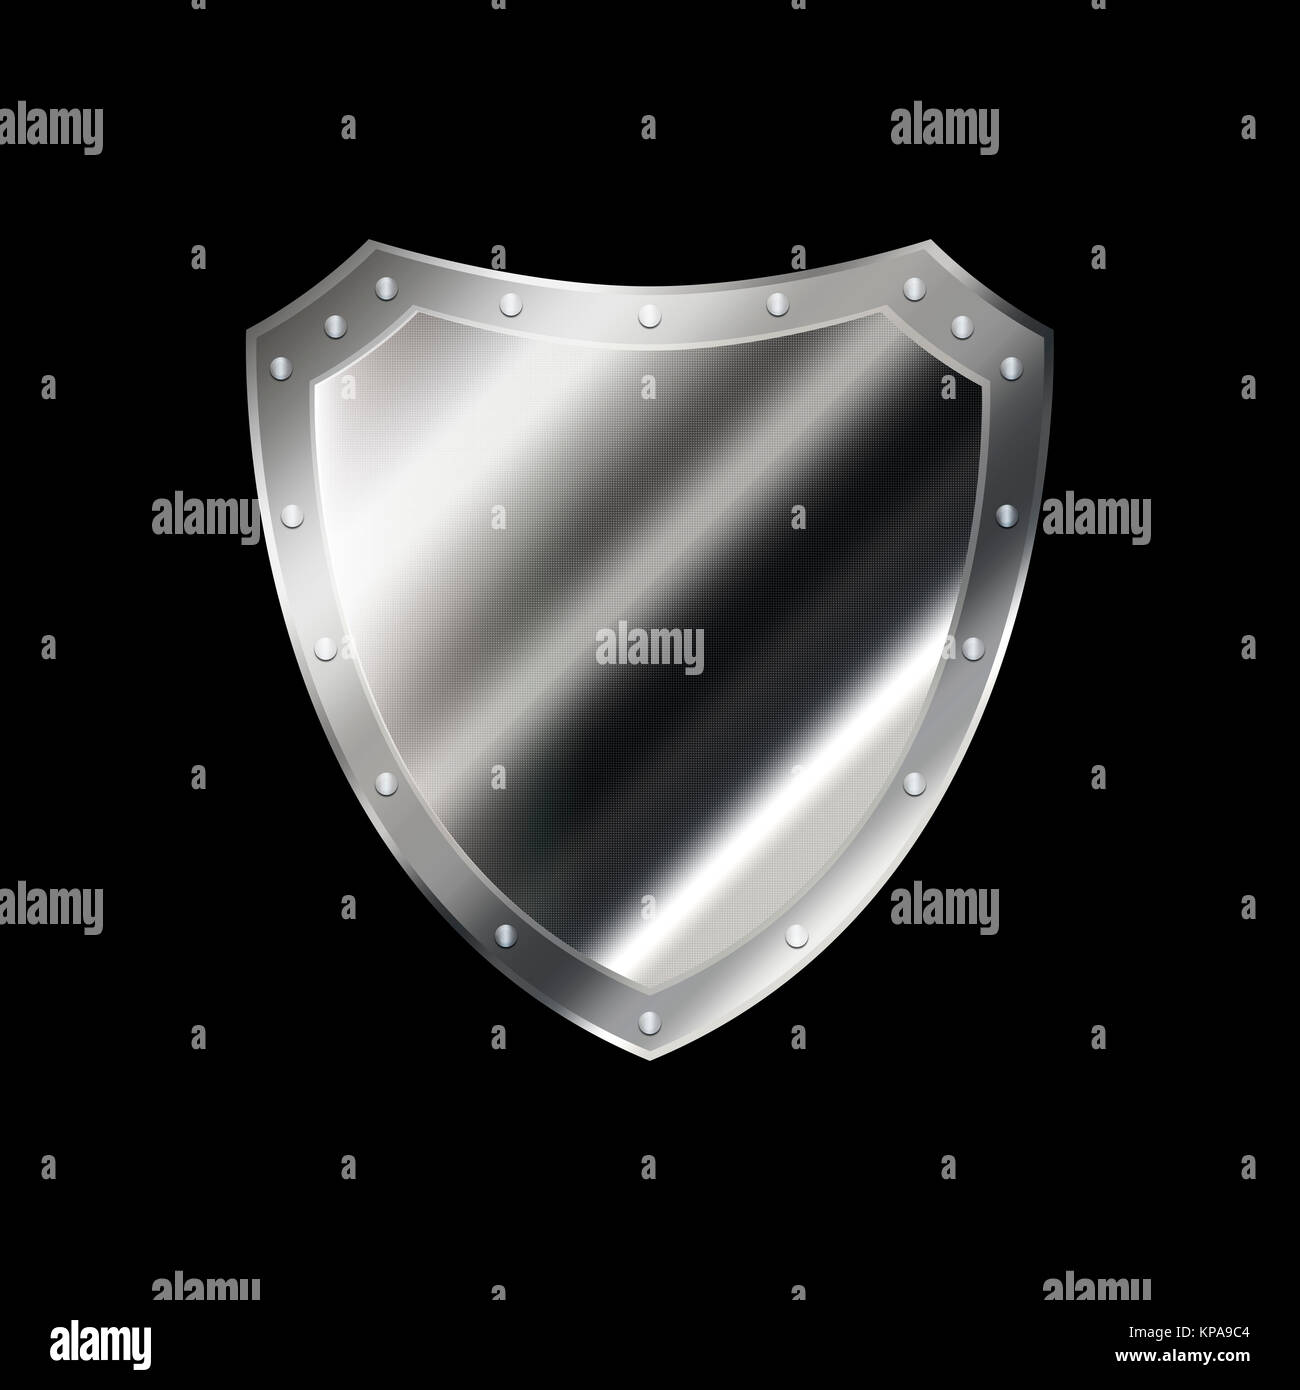 Riveted silver shield on black background. Stock Photo